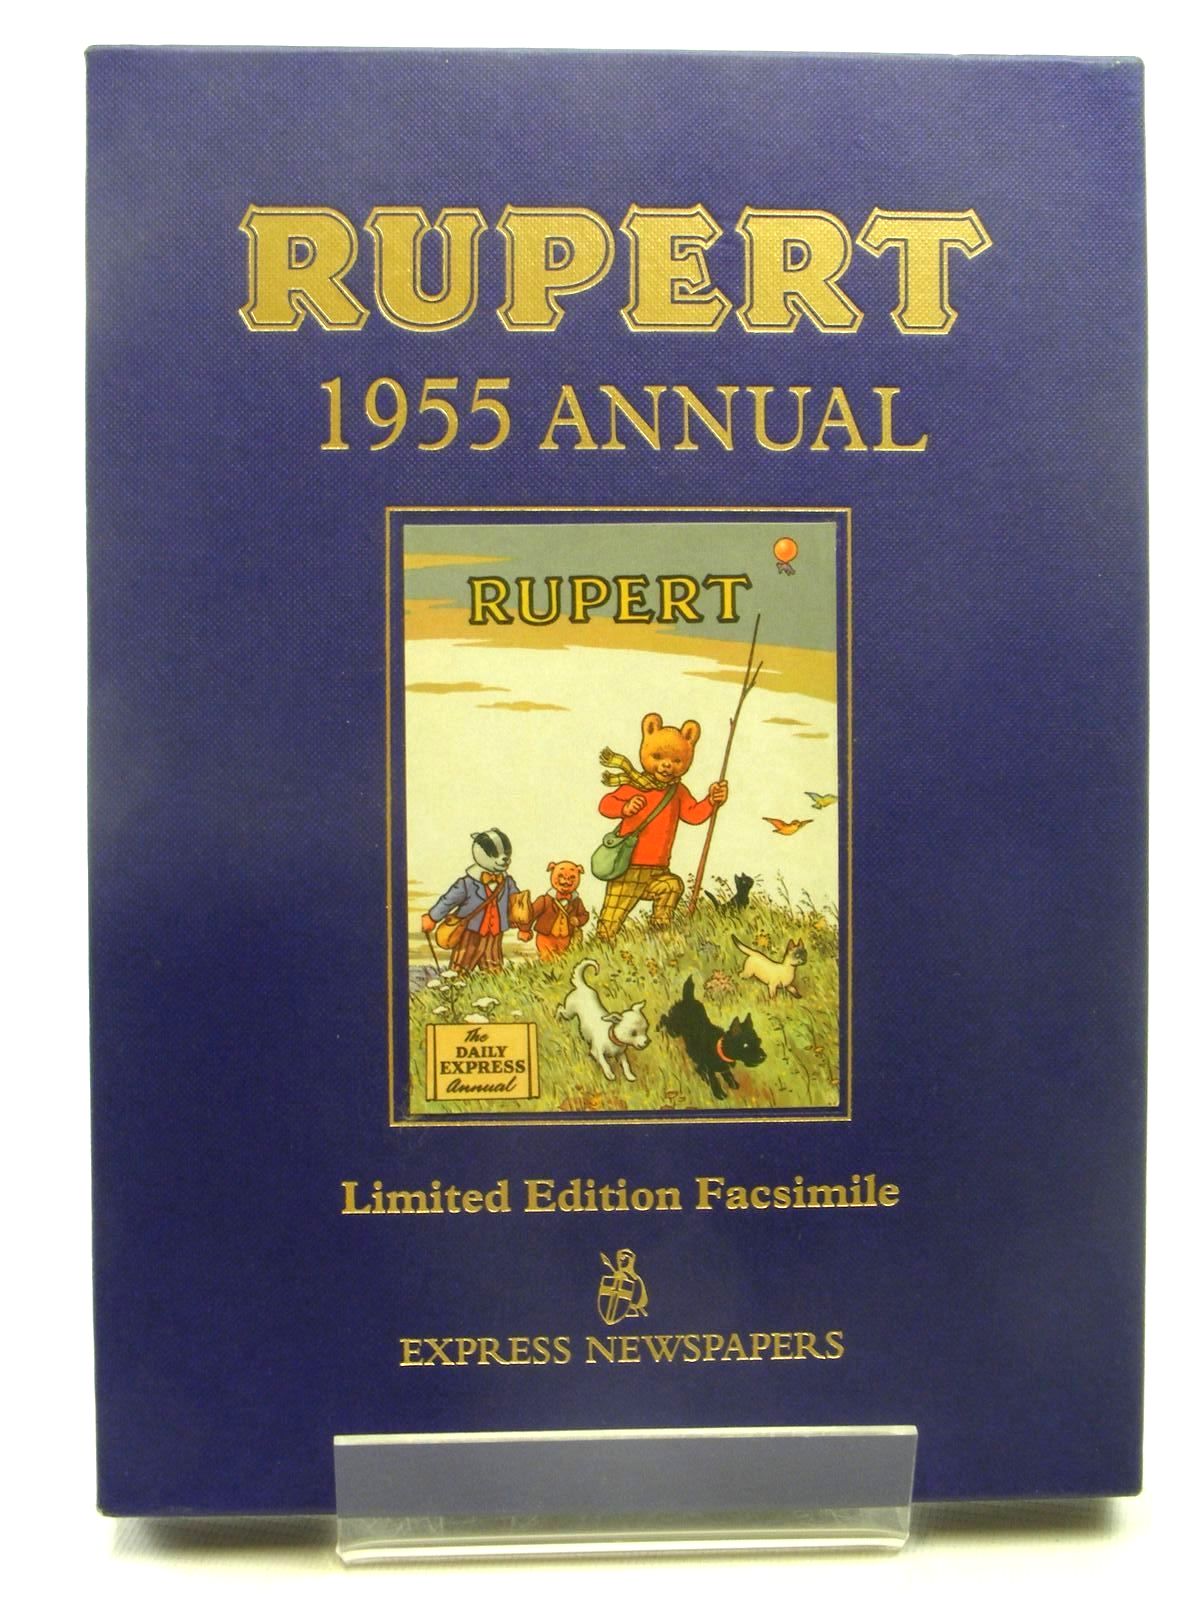 Cover of RUPERT ANNUAL 1955 (FACSIMILE) by Alfred Bestall